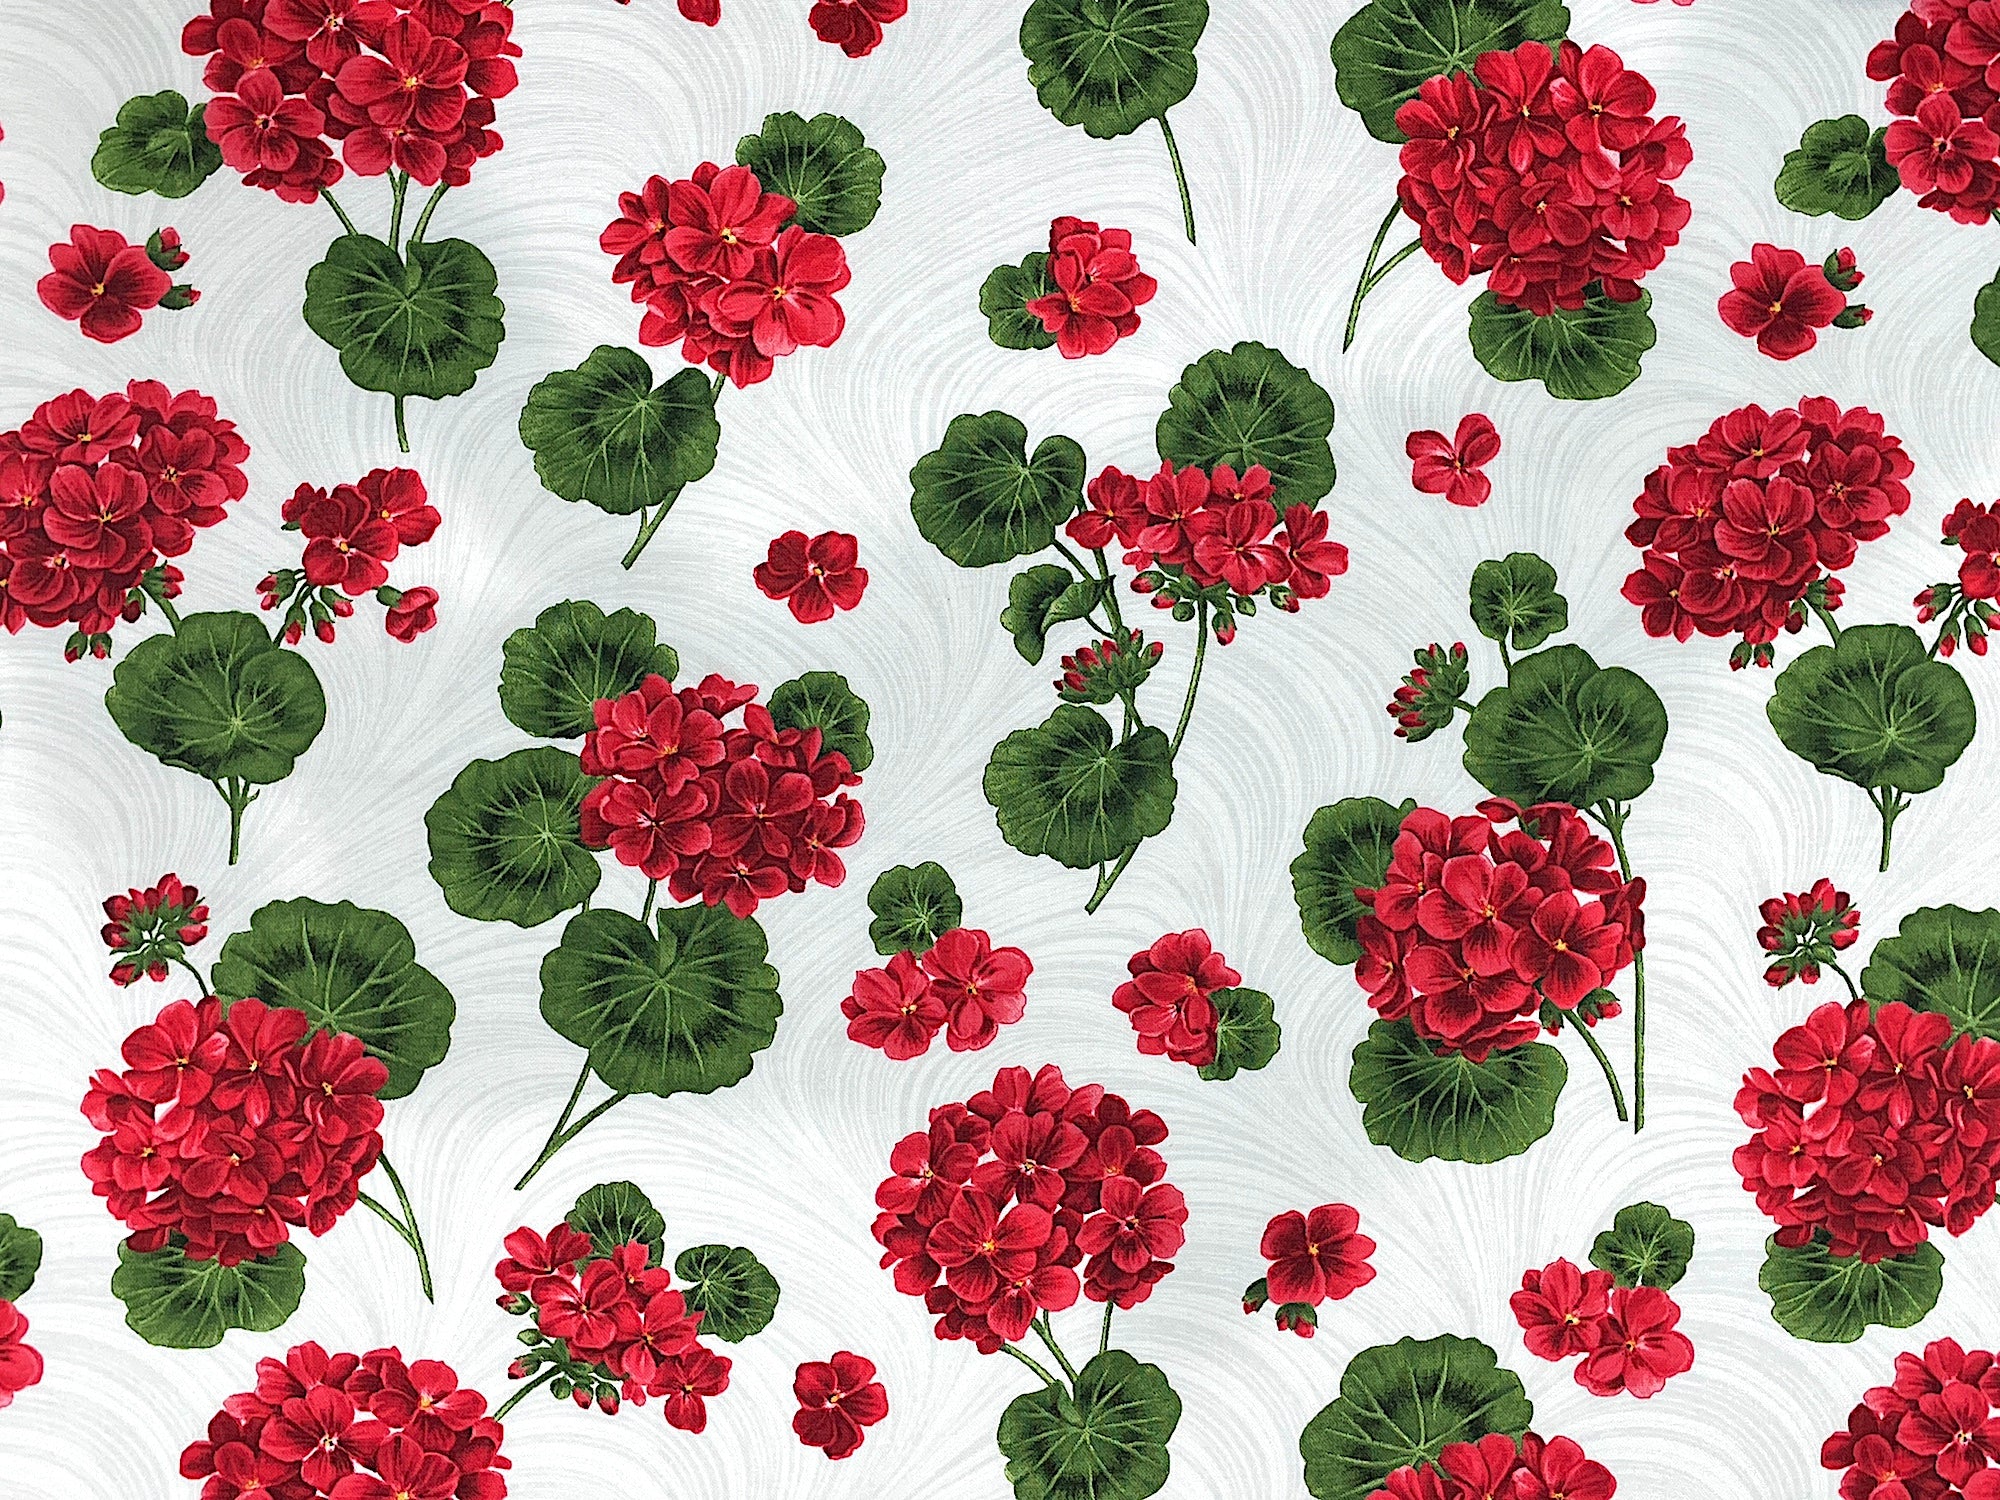 White Cotton fabric covered with red geraniums and green leaves .